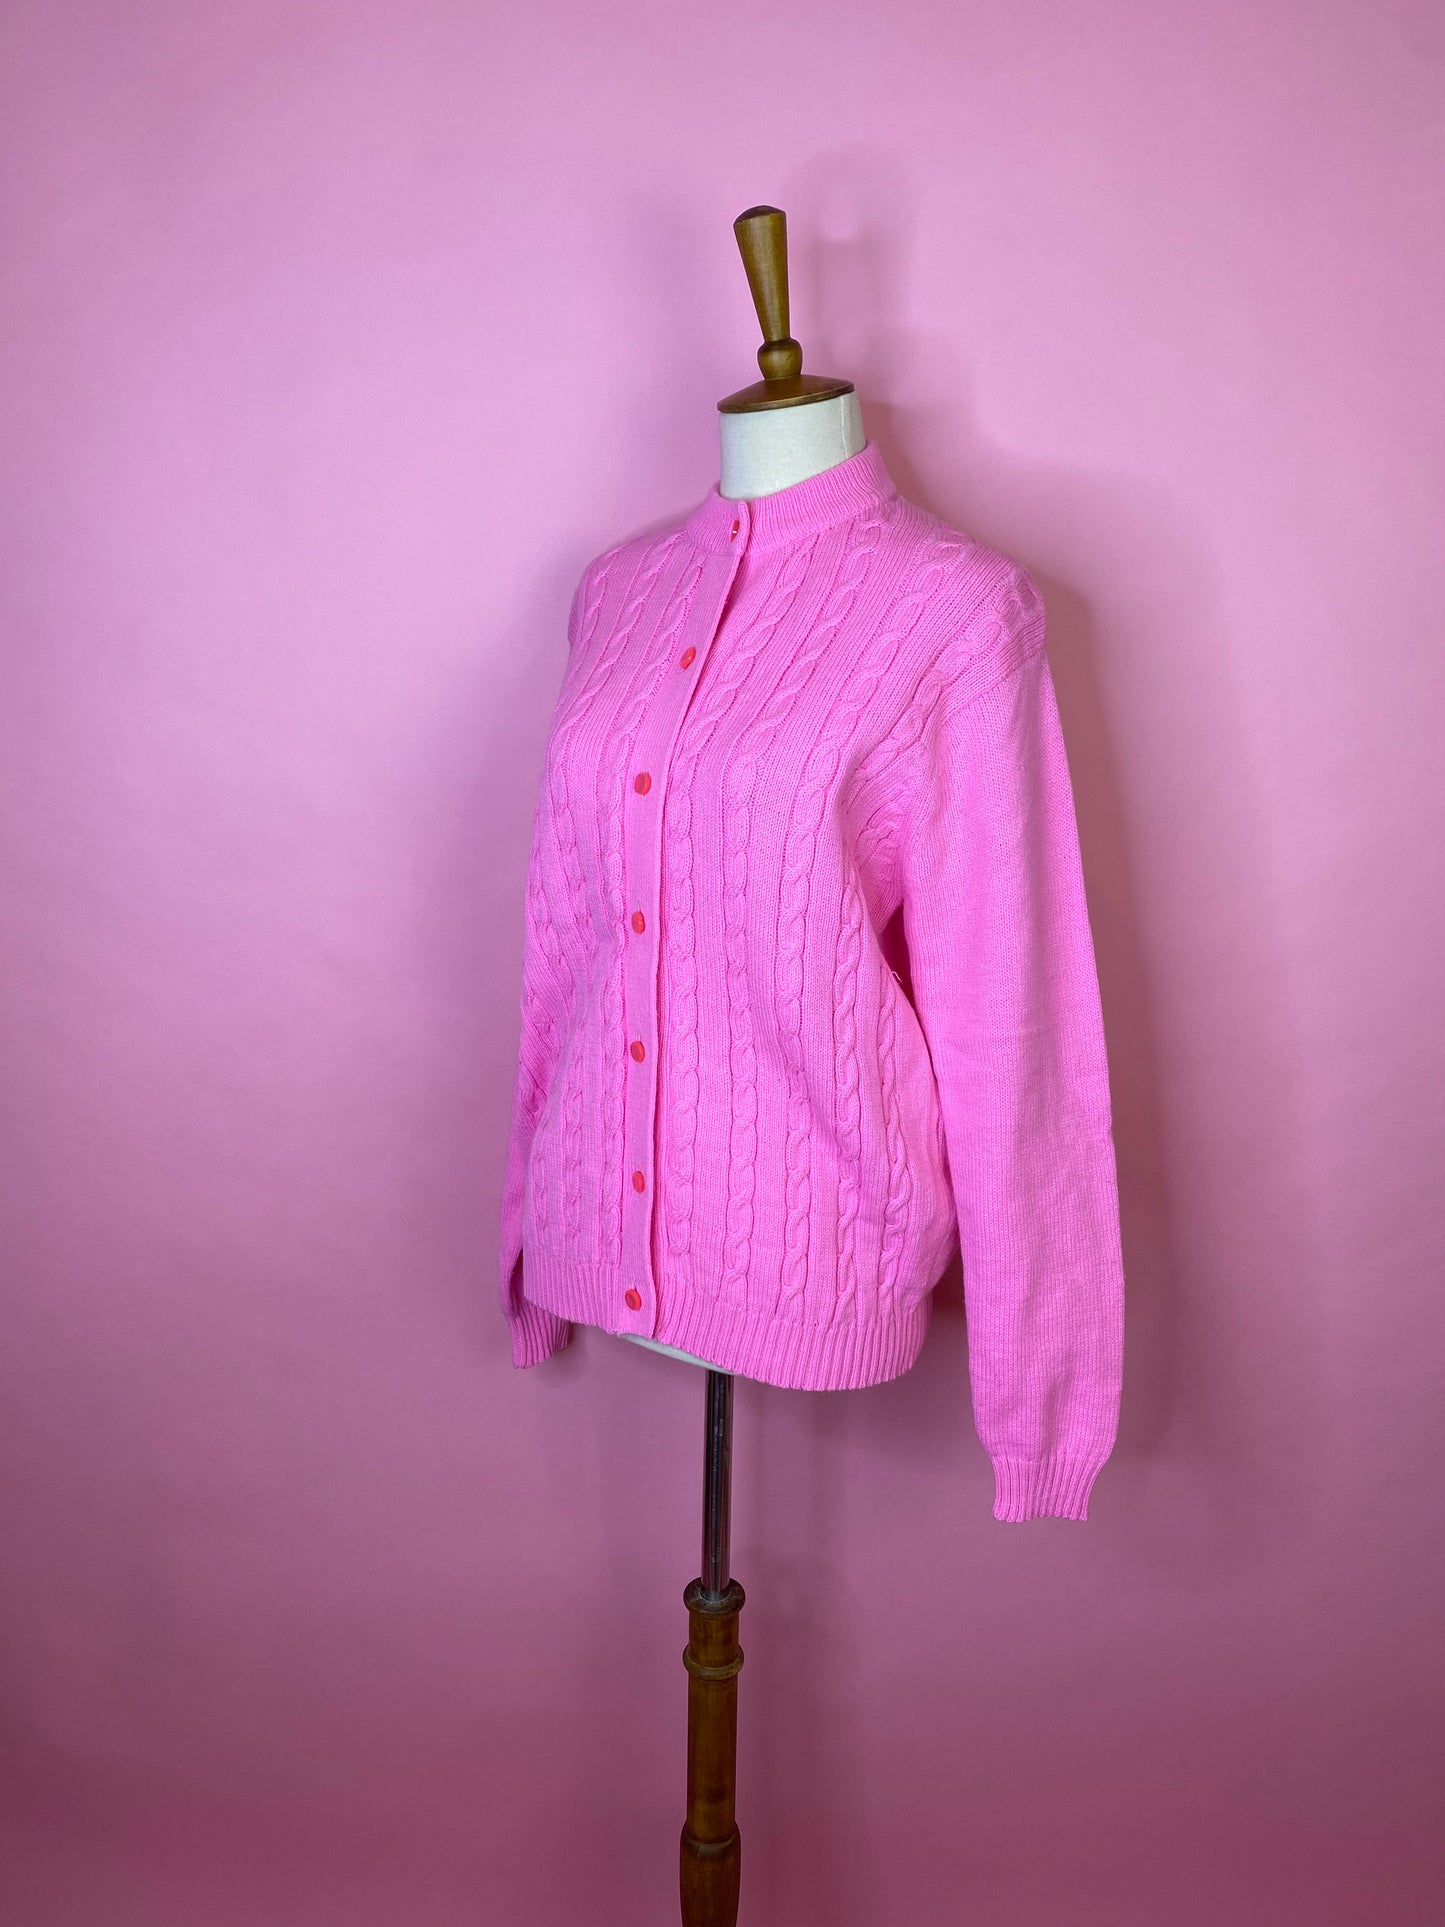 The Betsy Sweater, 1960's, 40" Bust